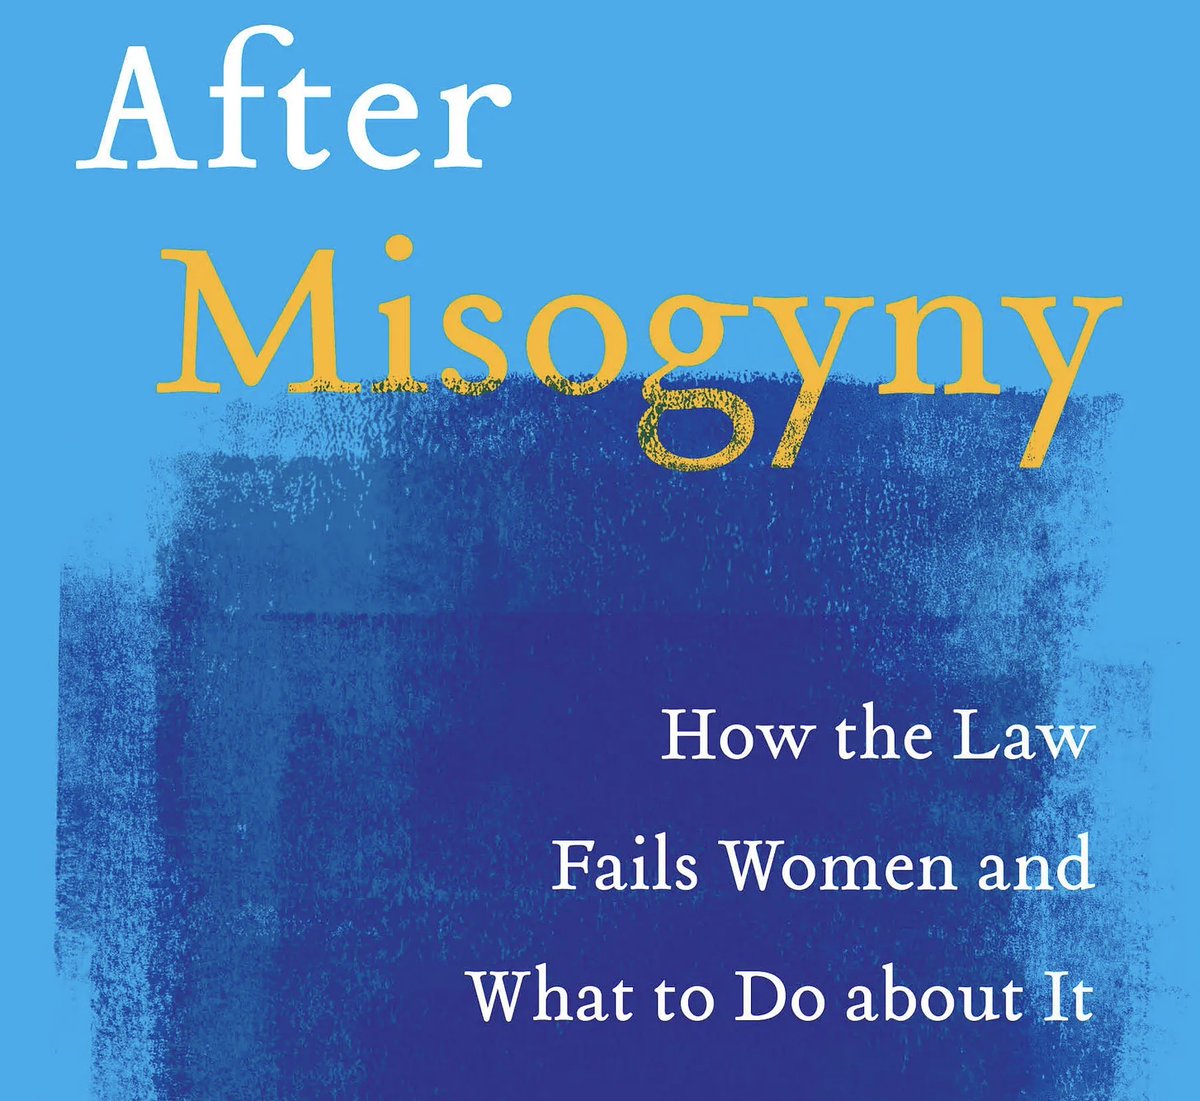 Today @JulieCSuk joined me on the @BucksCoBeacon podcast The Signal to talk about her new book 'After Misogyny: How the Law Fails Women and What to Do about It.' LISTEN: tinyurl.com/nhz732ze